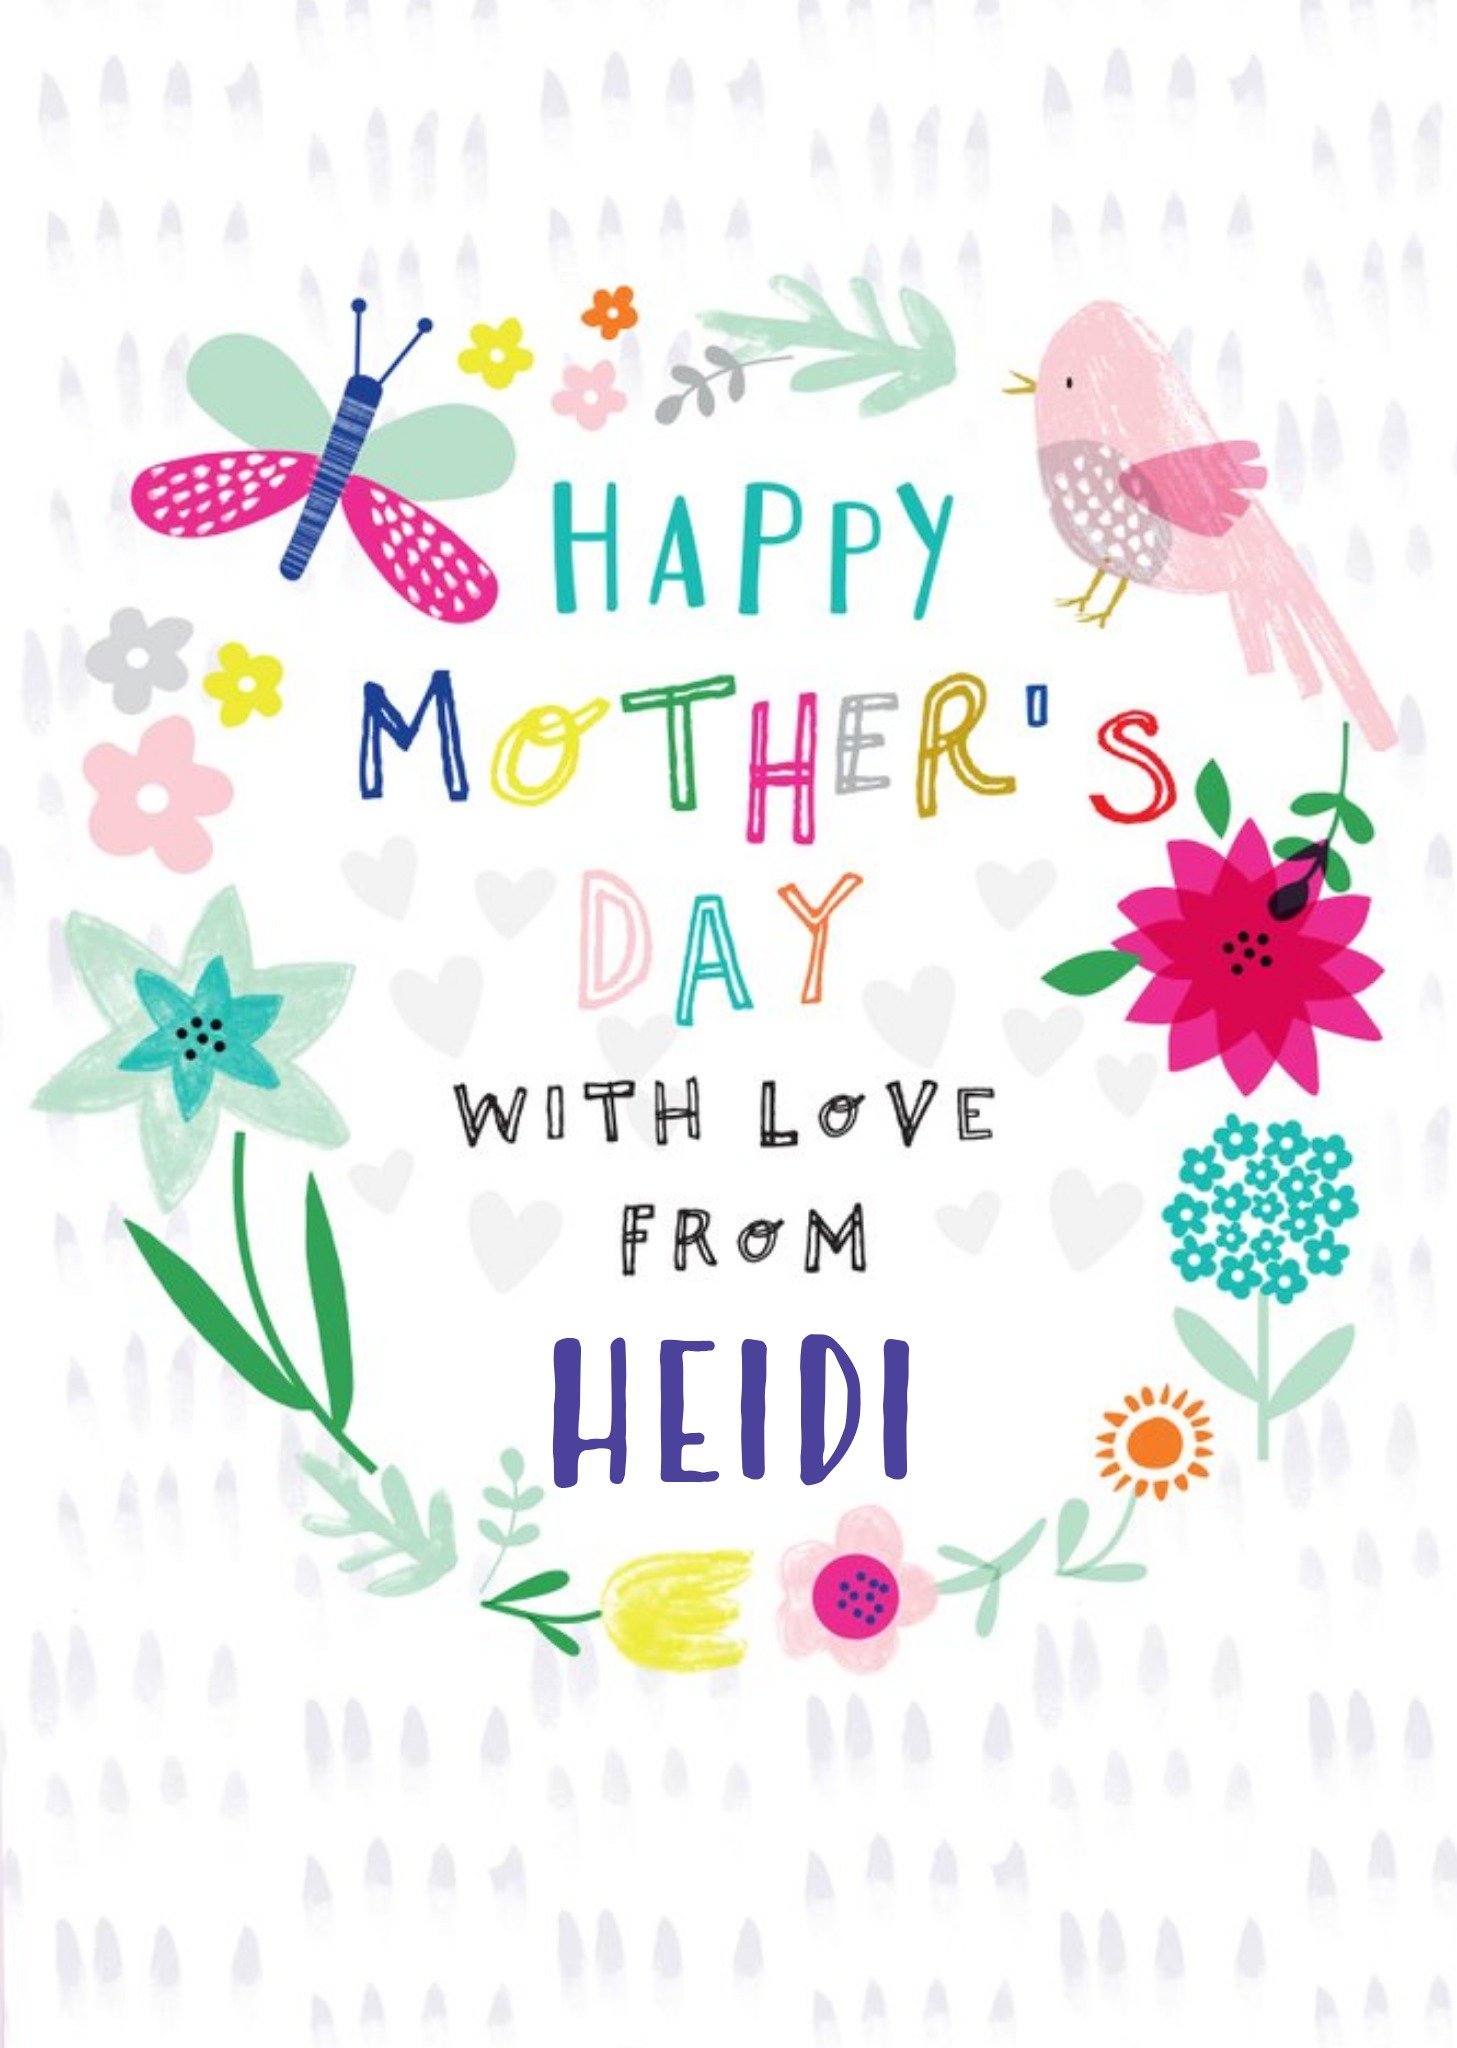 Moonpig Cute Illustration Happy Mother's Day With Love Ecard